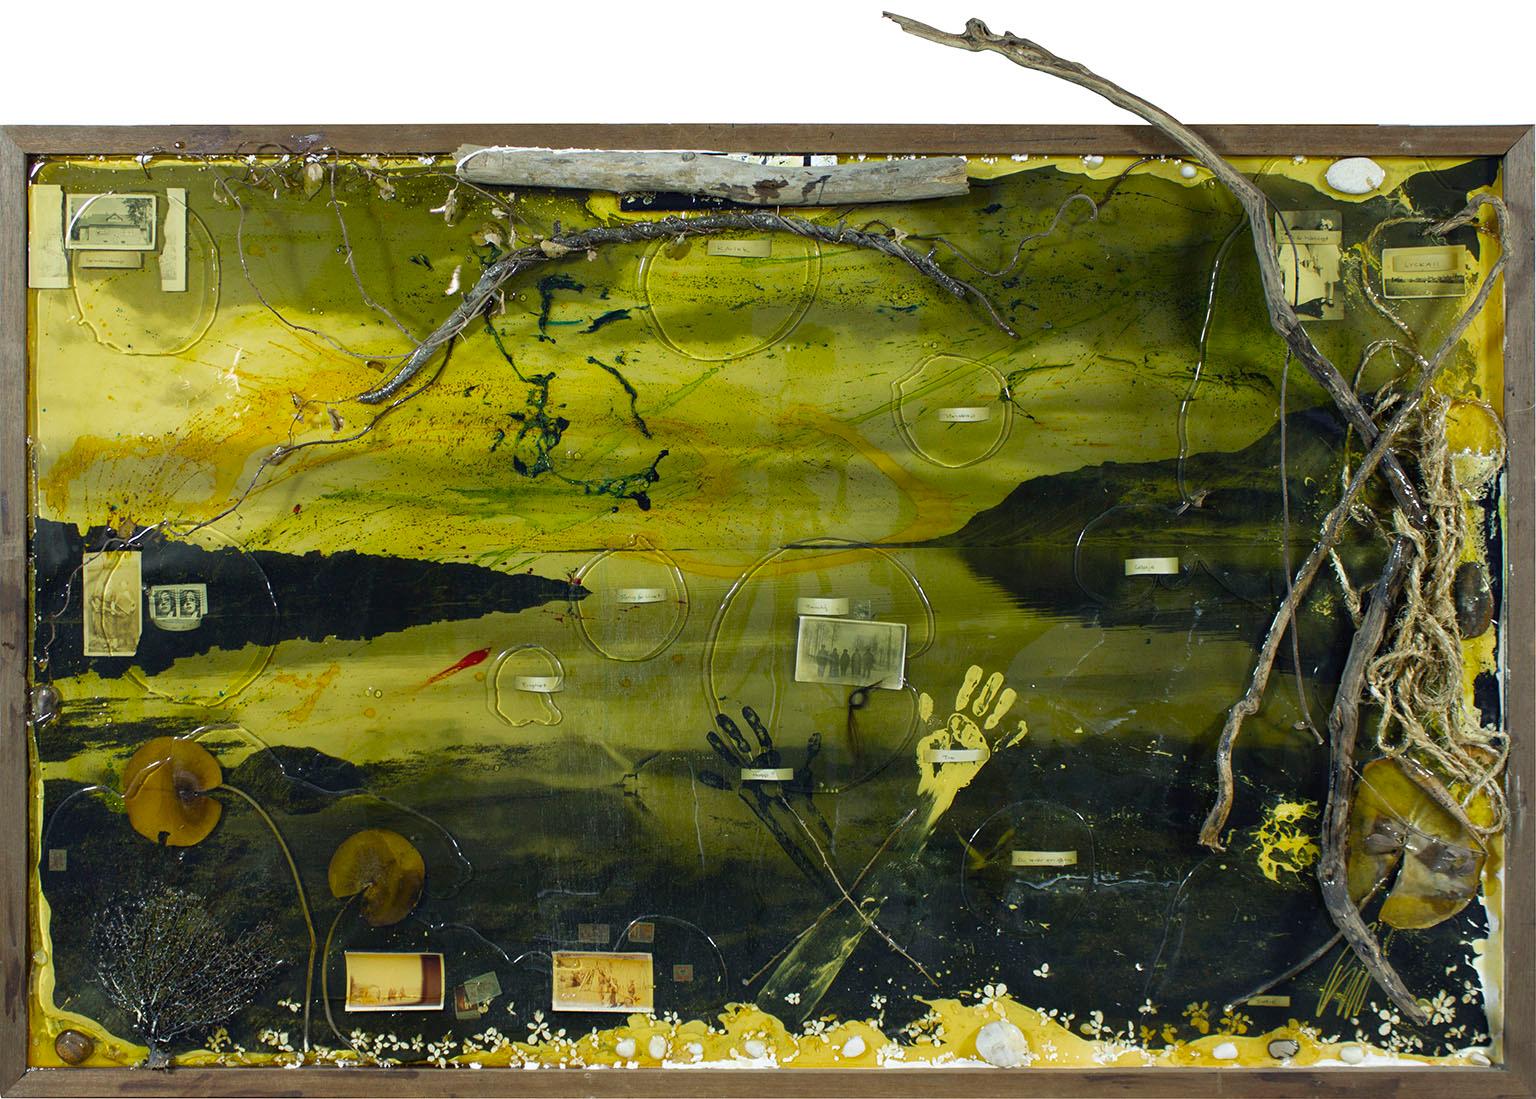 Raphael Mazzucco Landscape Print - "Lost" by Mazzucco - C-print, oil paint and mixed media encased in resin 